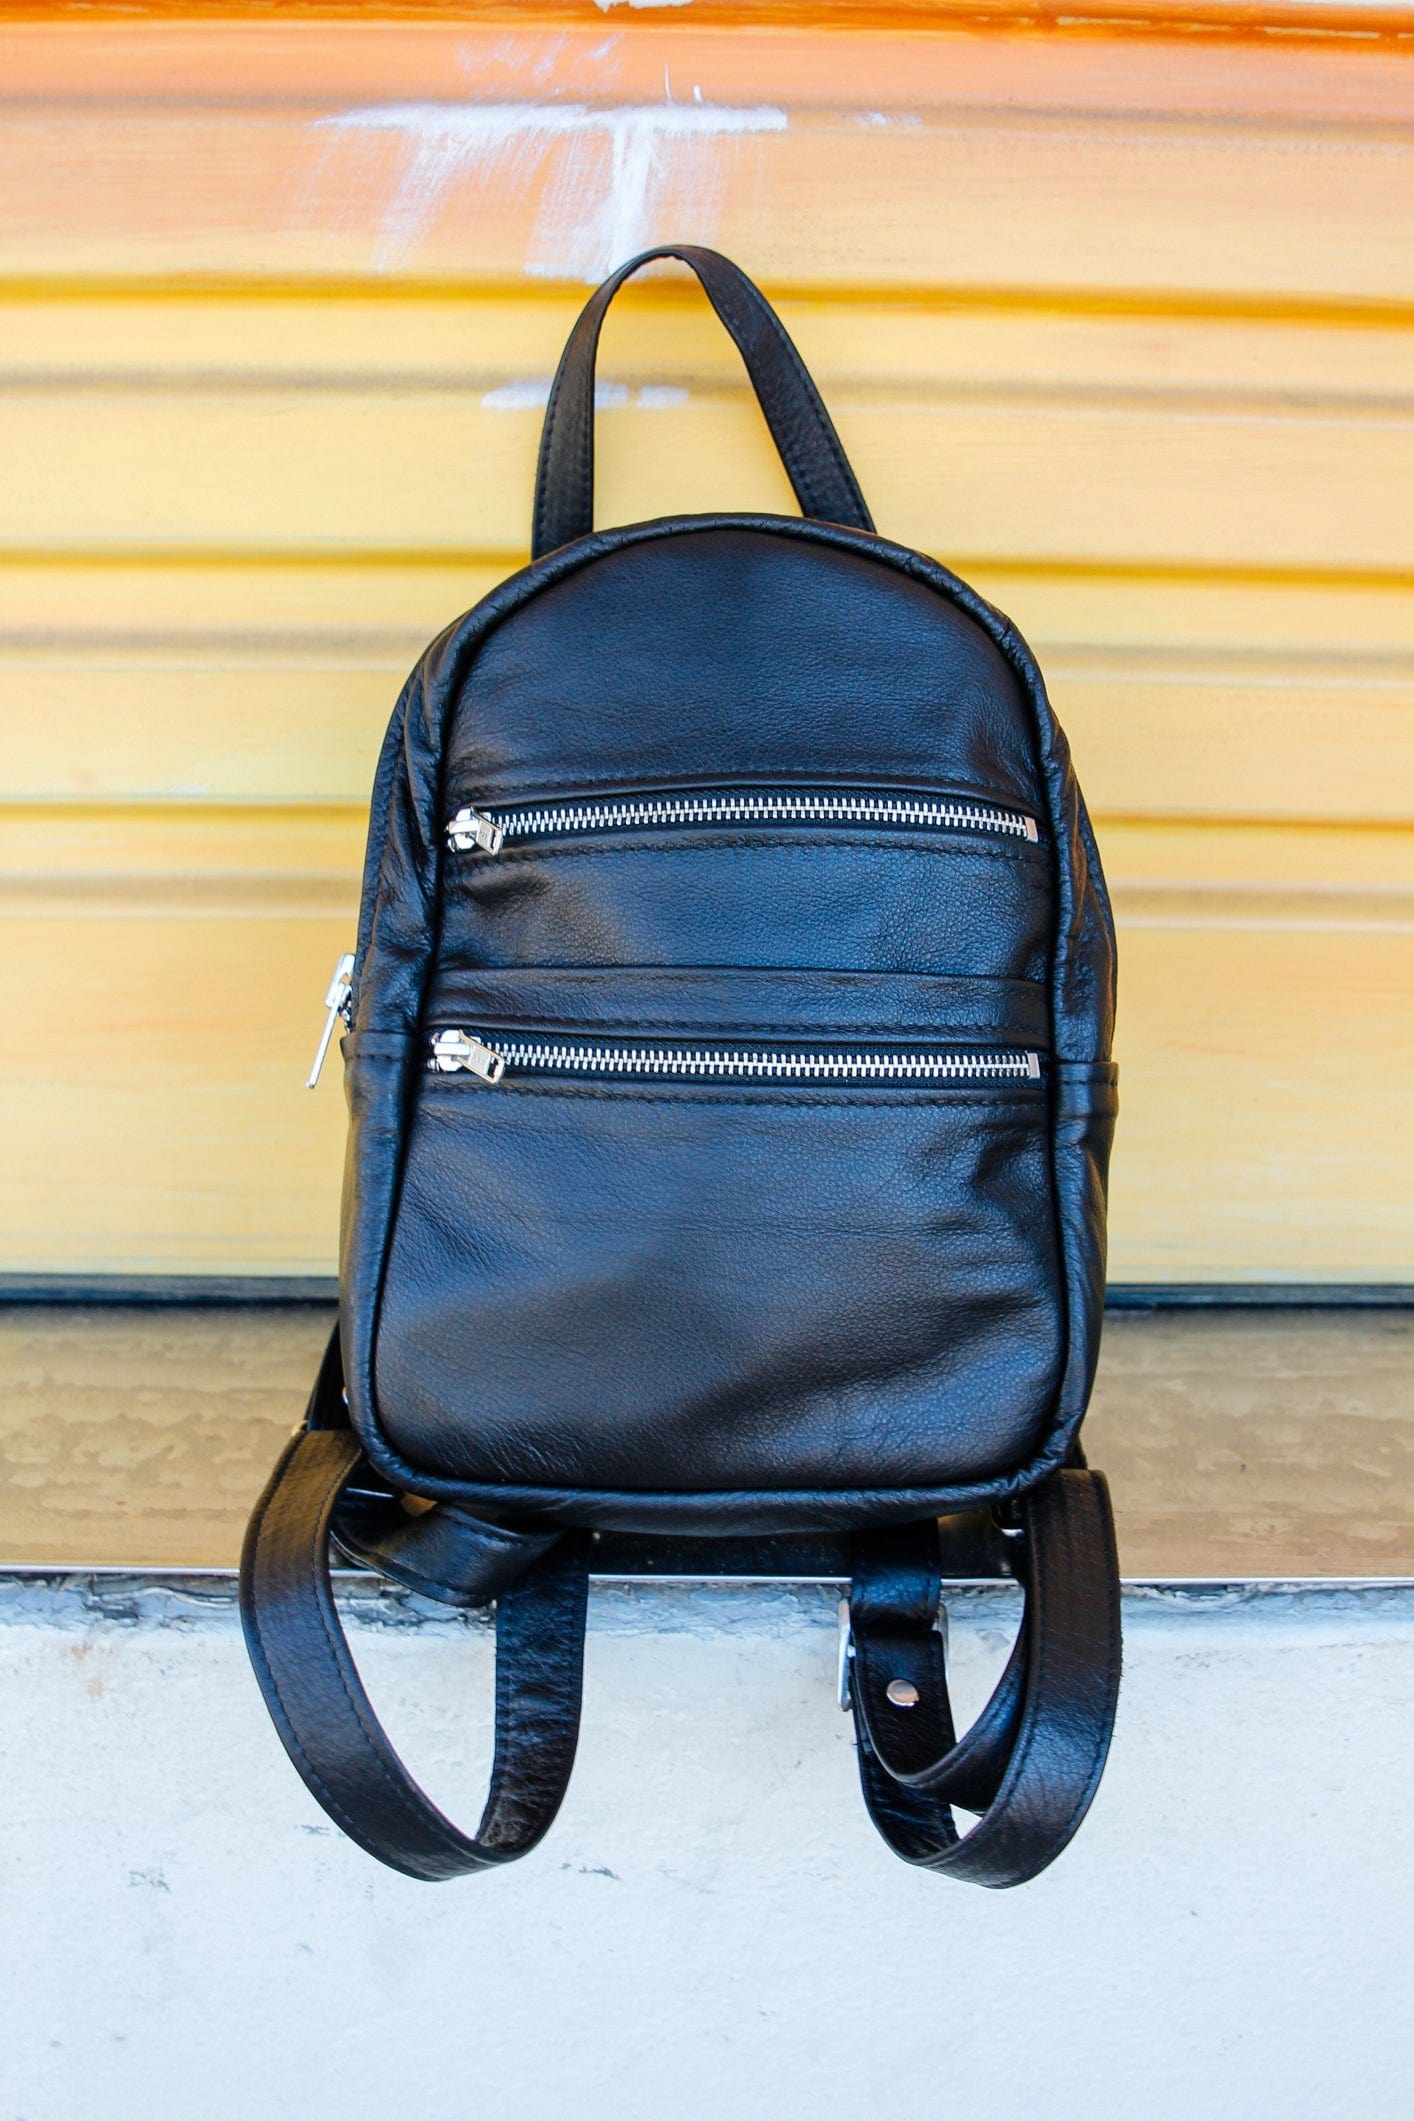 The Real McCaul Leathergoods Back Packs Black / Silver The Annie Backpack - Small - Cowhide Australian Made Australian Owned Leather Backpacks Made in Australia